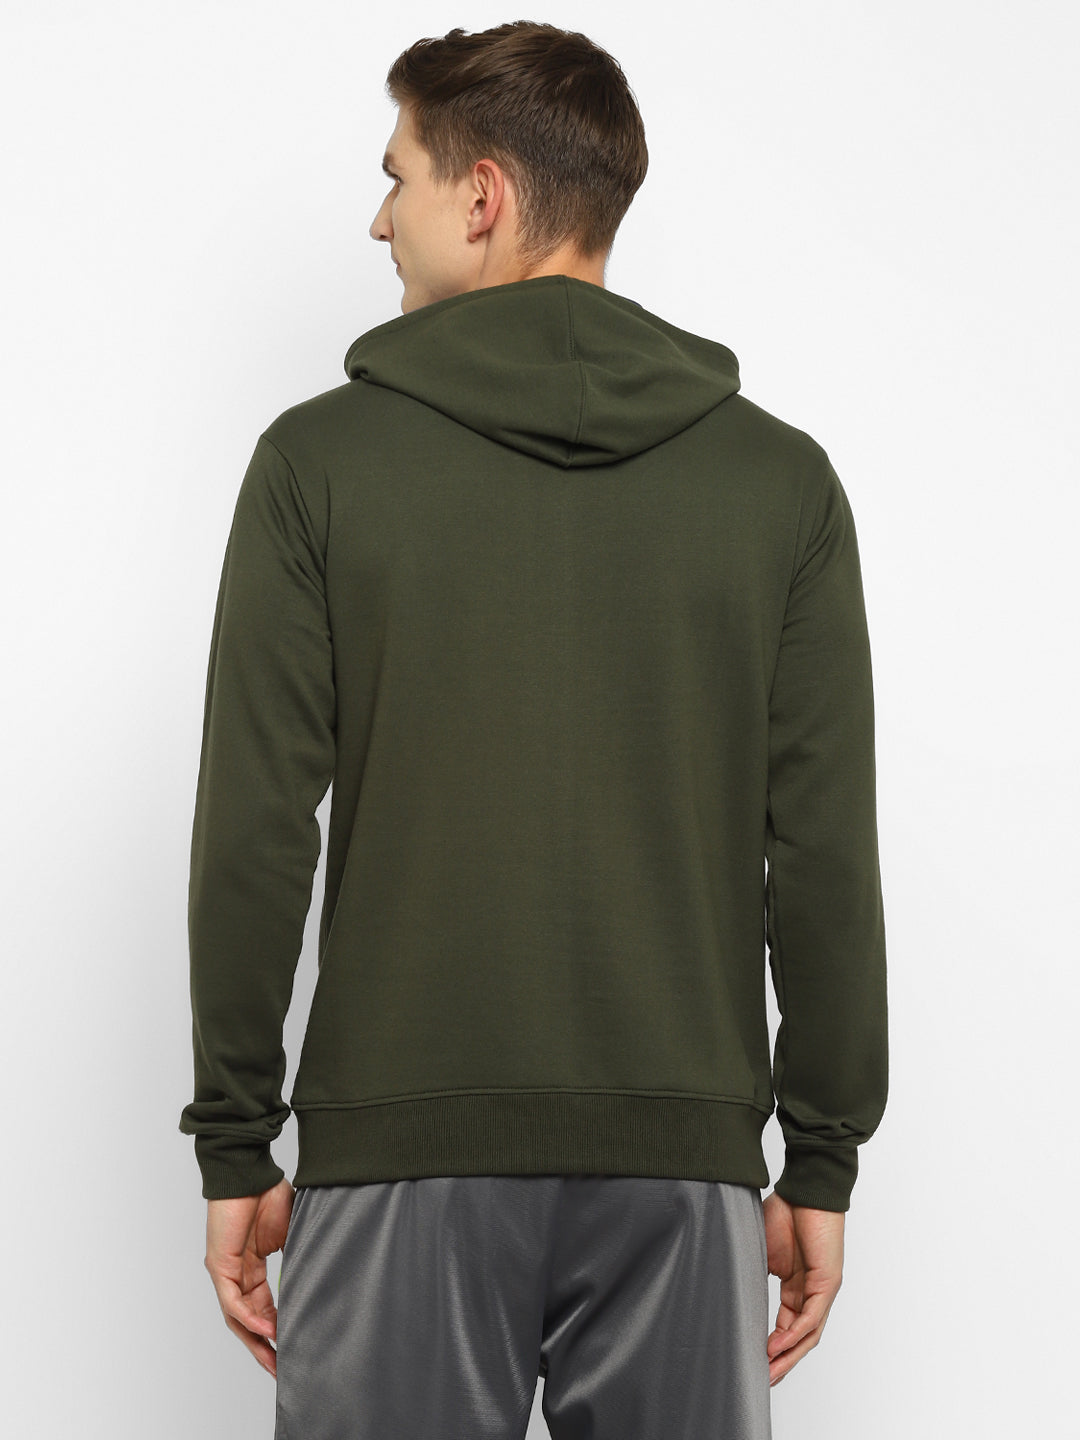 Shop MENS PCF THINK DIFFERENT HOODIE Online